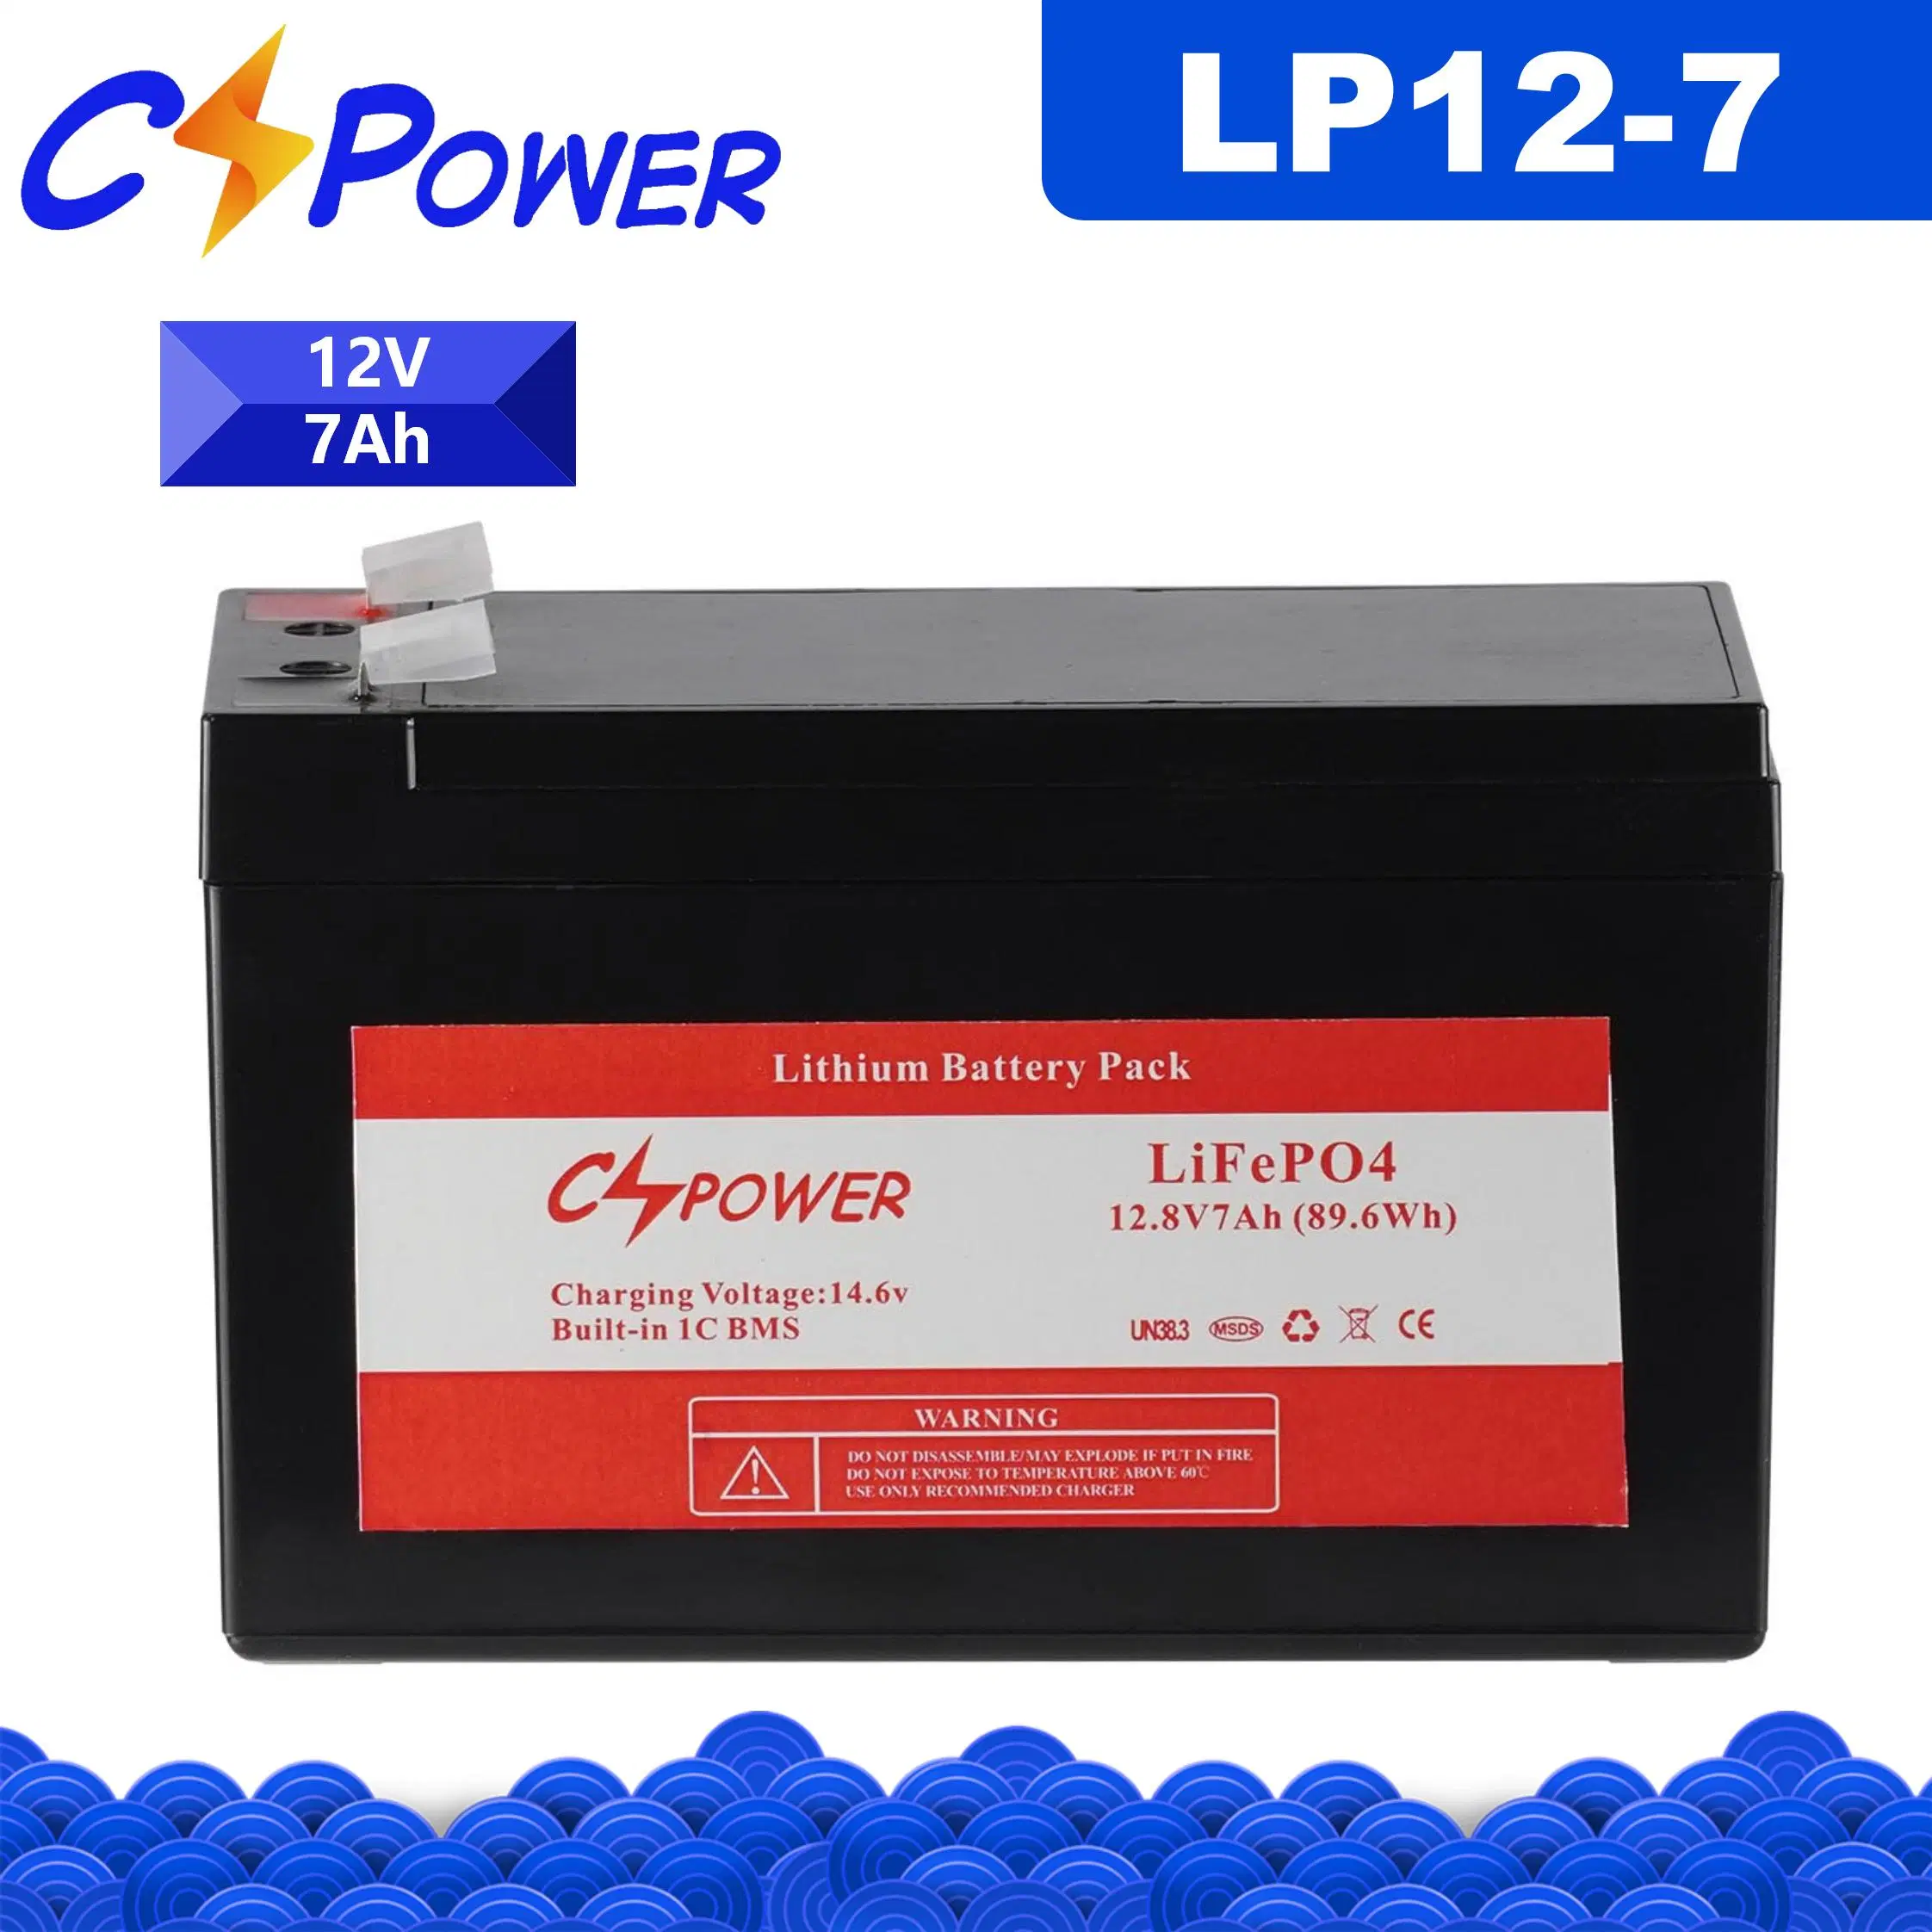 12V7ah LiFePO4 Storage Lithium Battery Rechargeable Power Tool /Solar